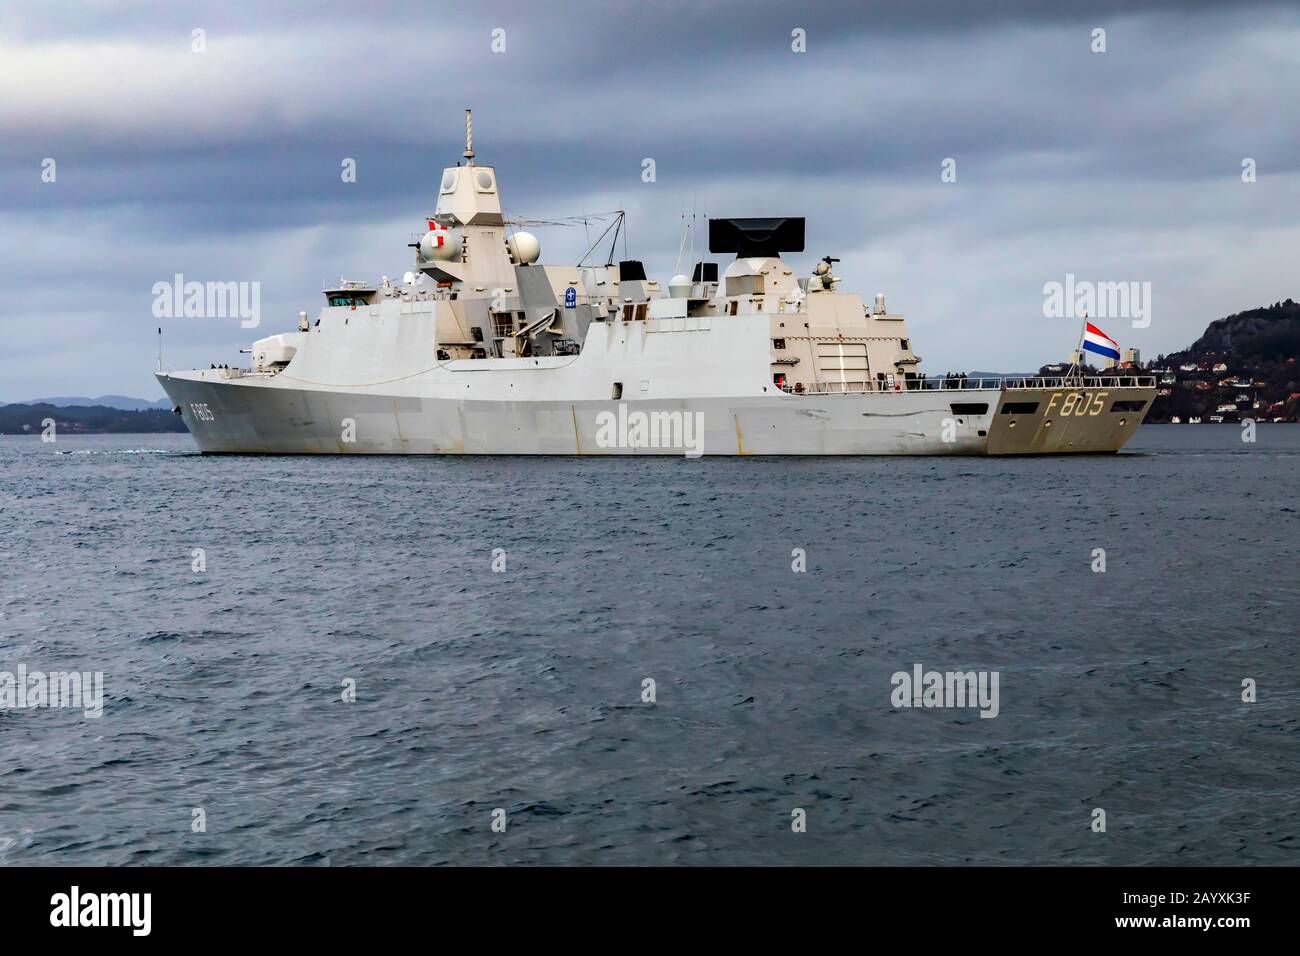 Dutch warship, frigate HNLMS Evertsen F805, departing from the port of Bergen, Norway. A dark and rainy winter day Stock Photo